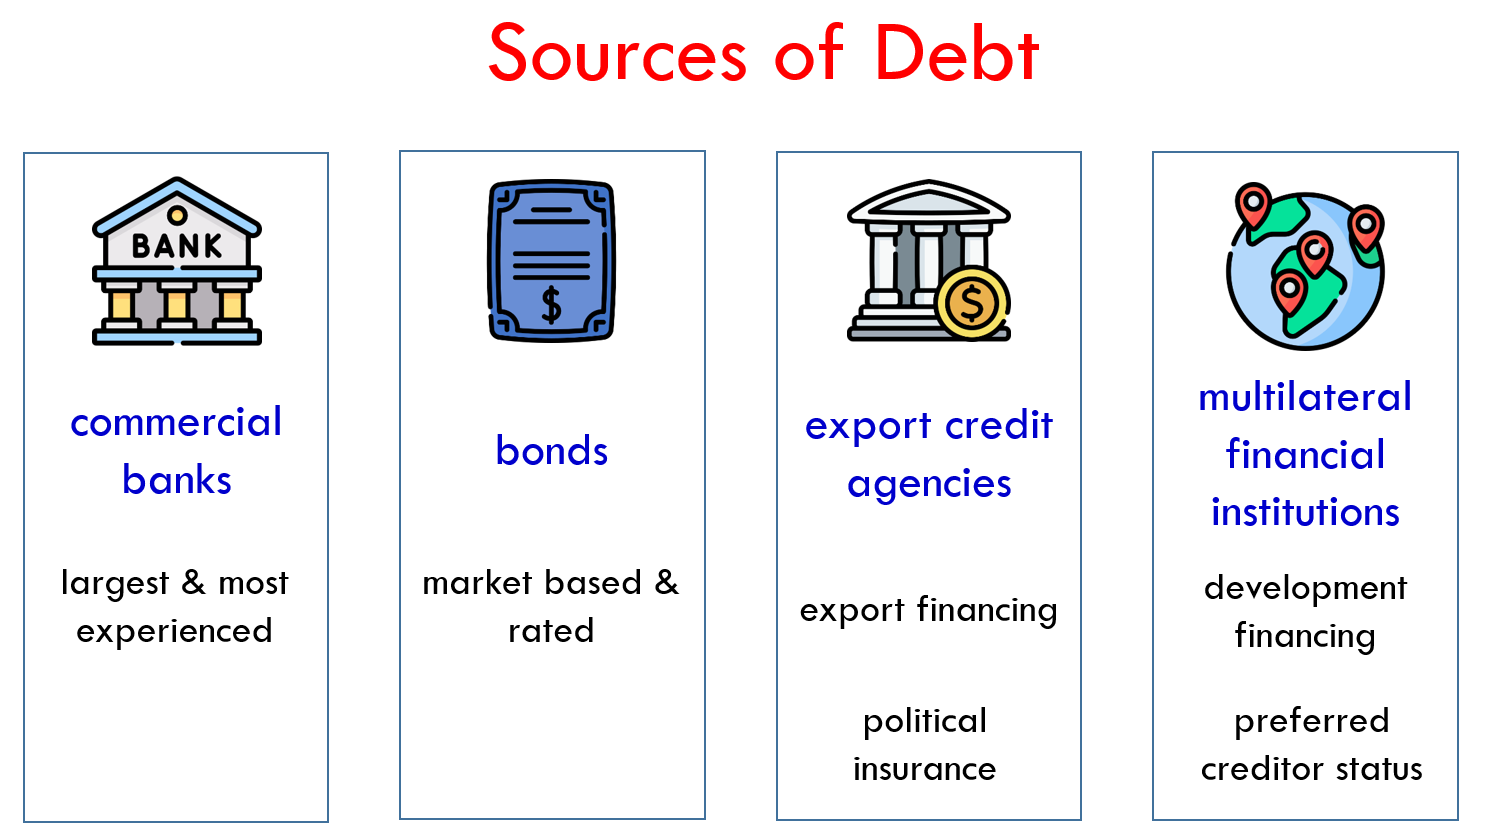 Source of project finance debt